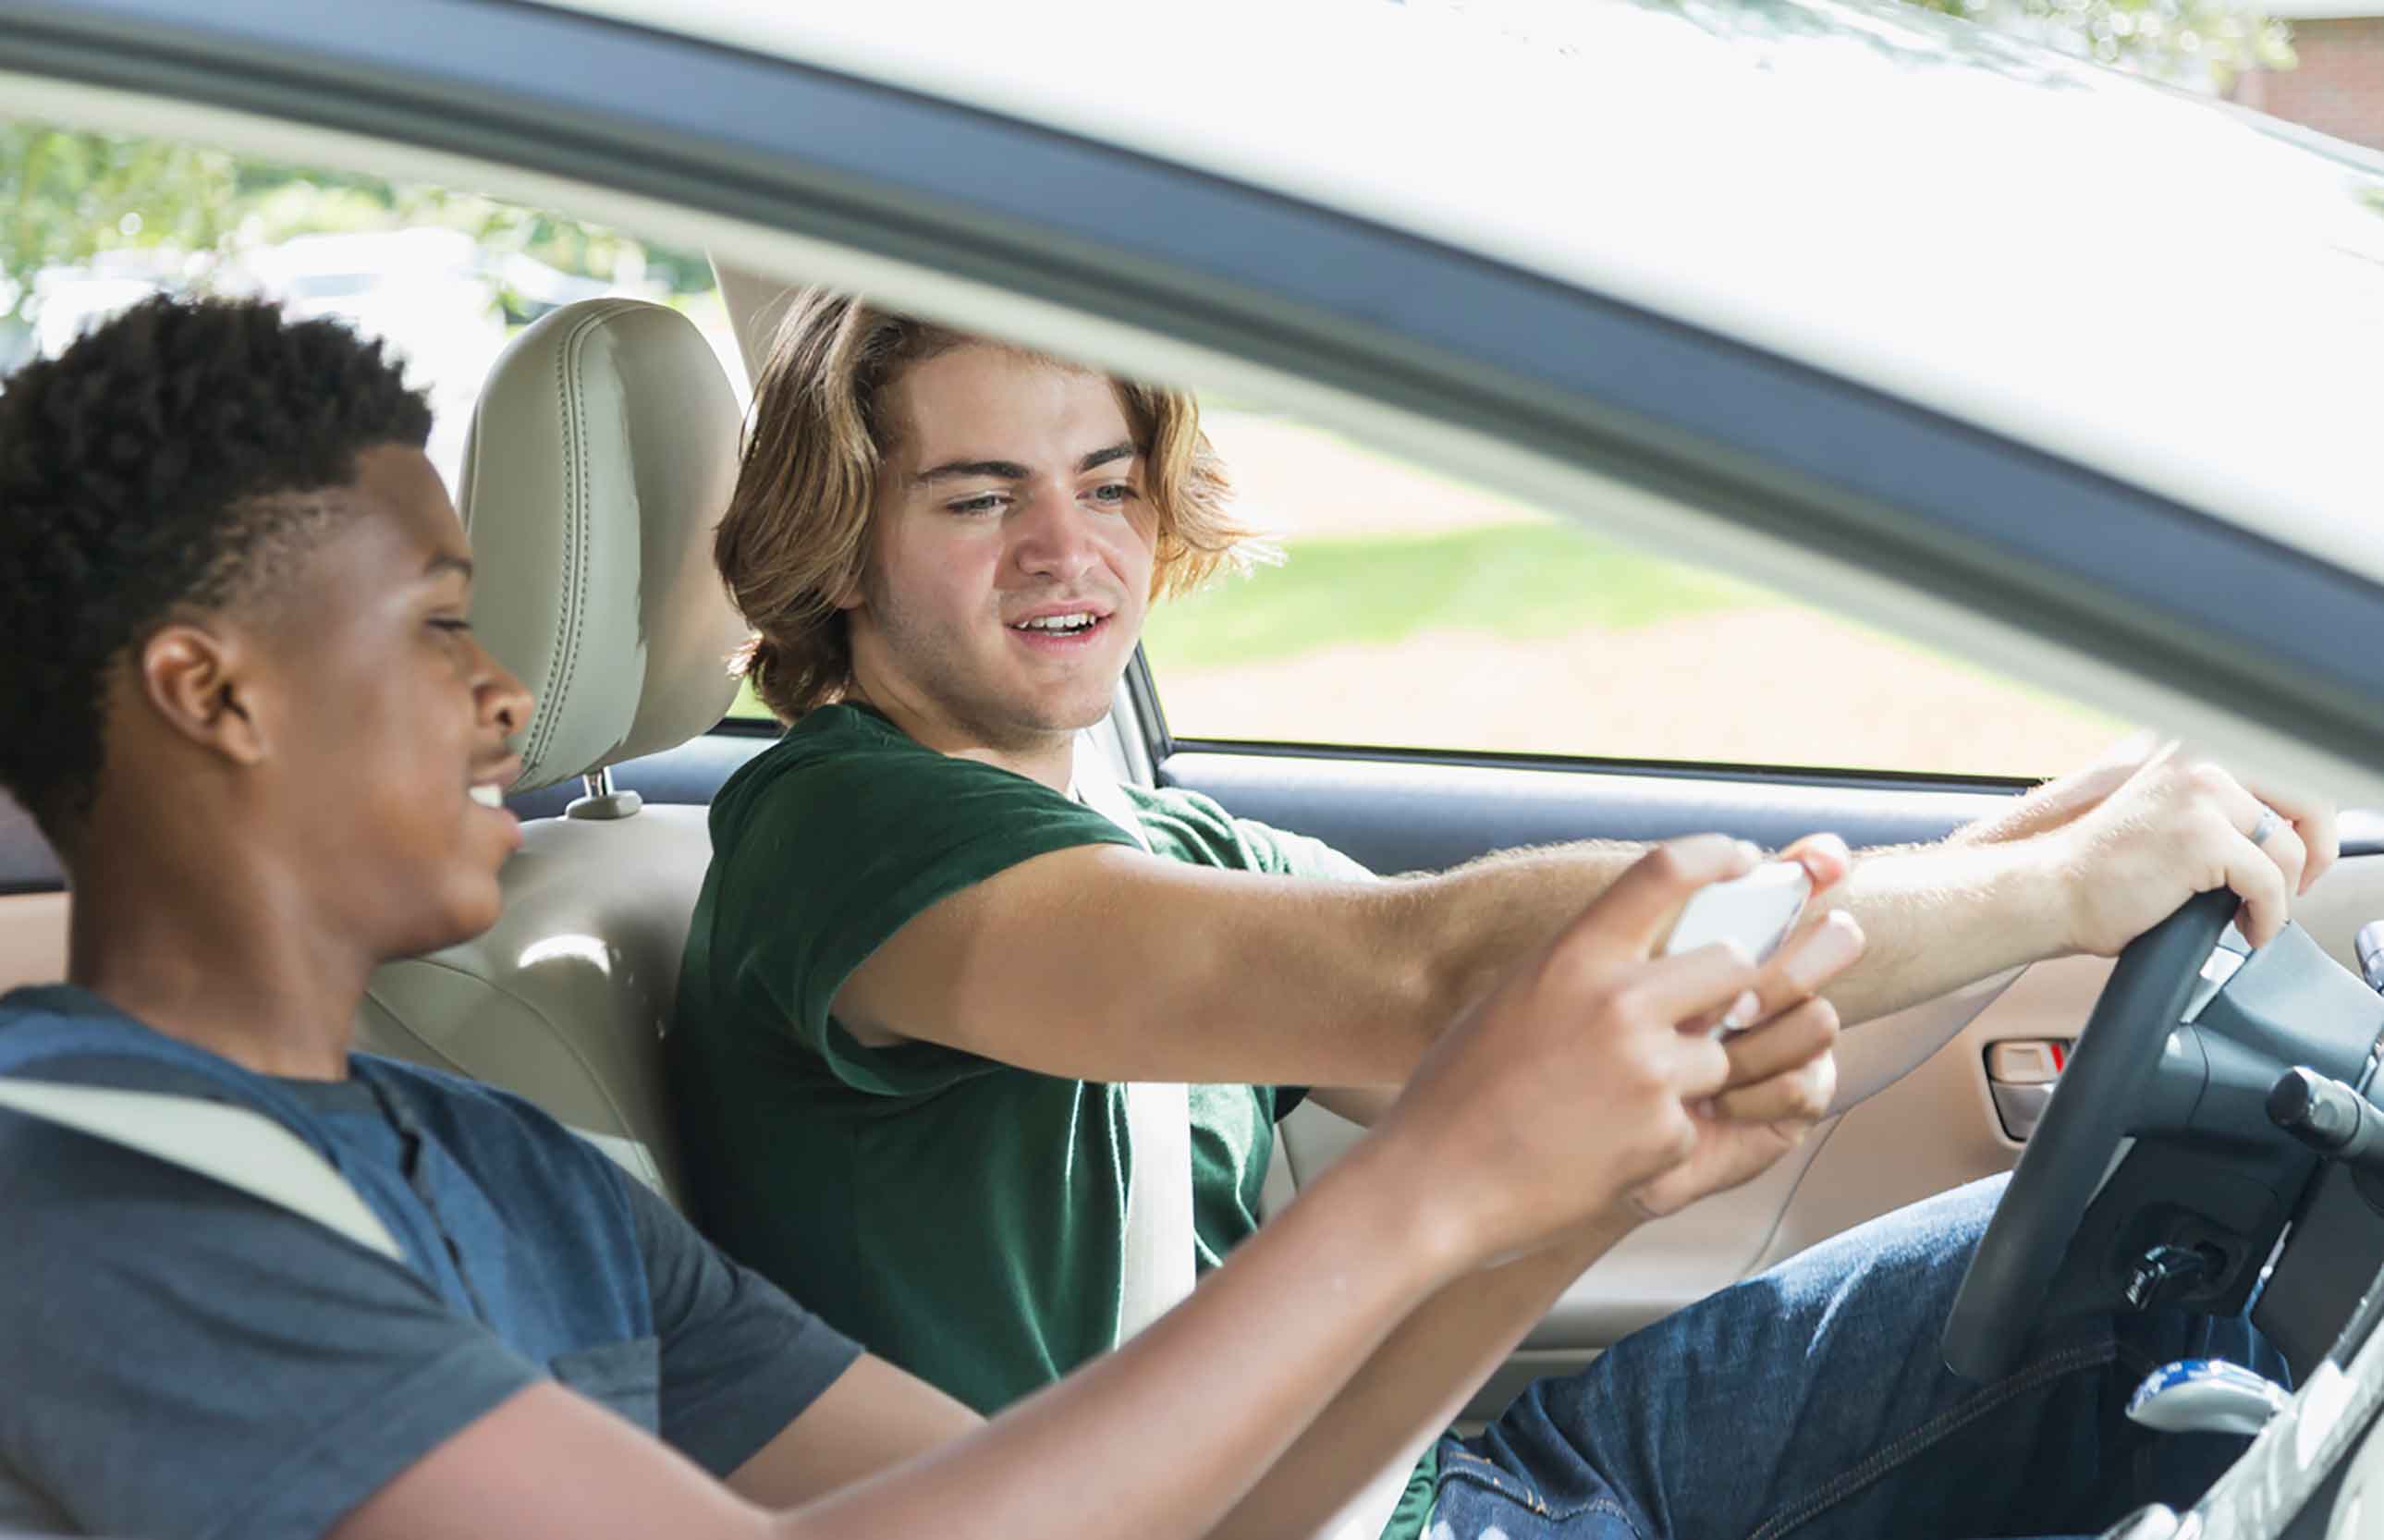 An analysis found Mid-Atlantic states were among the safest for teen drivers.